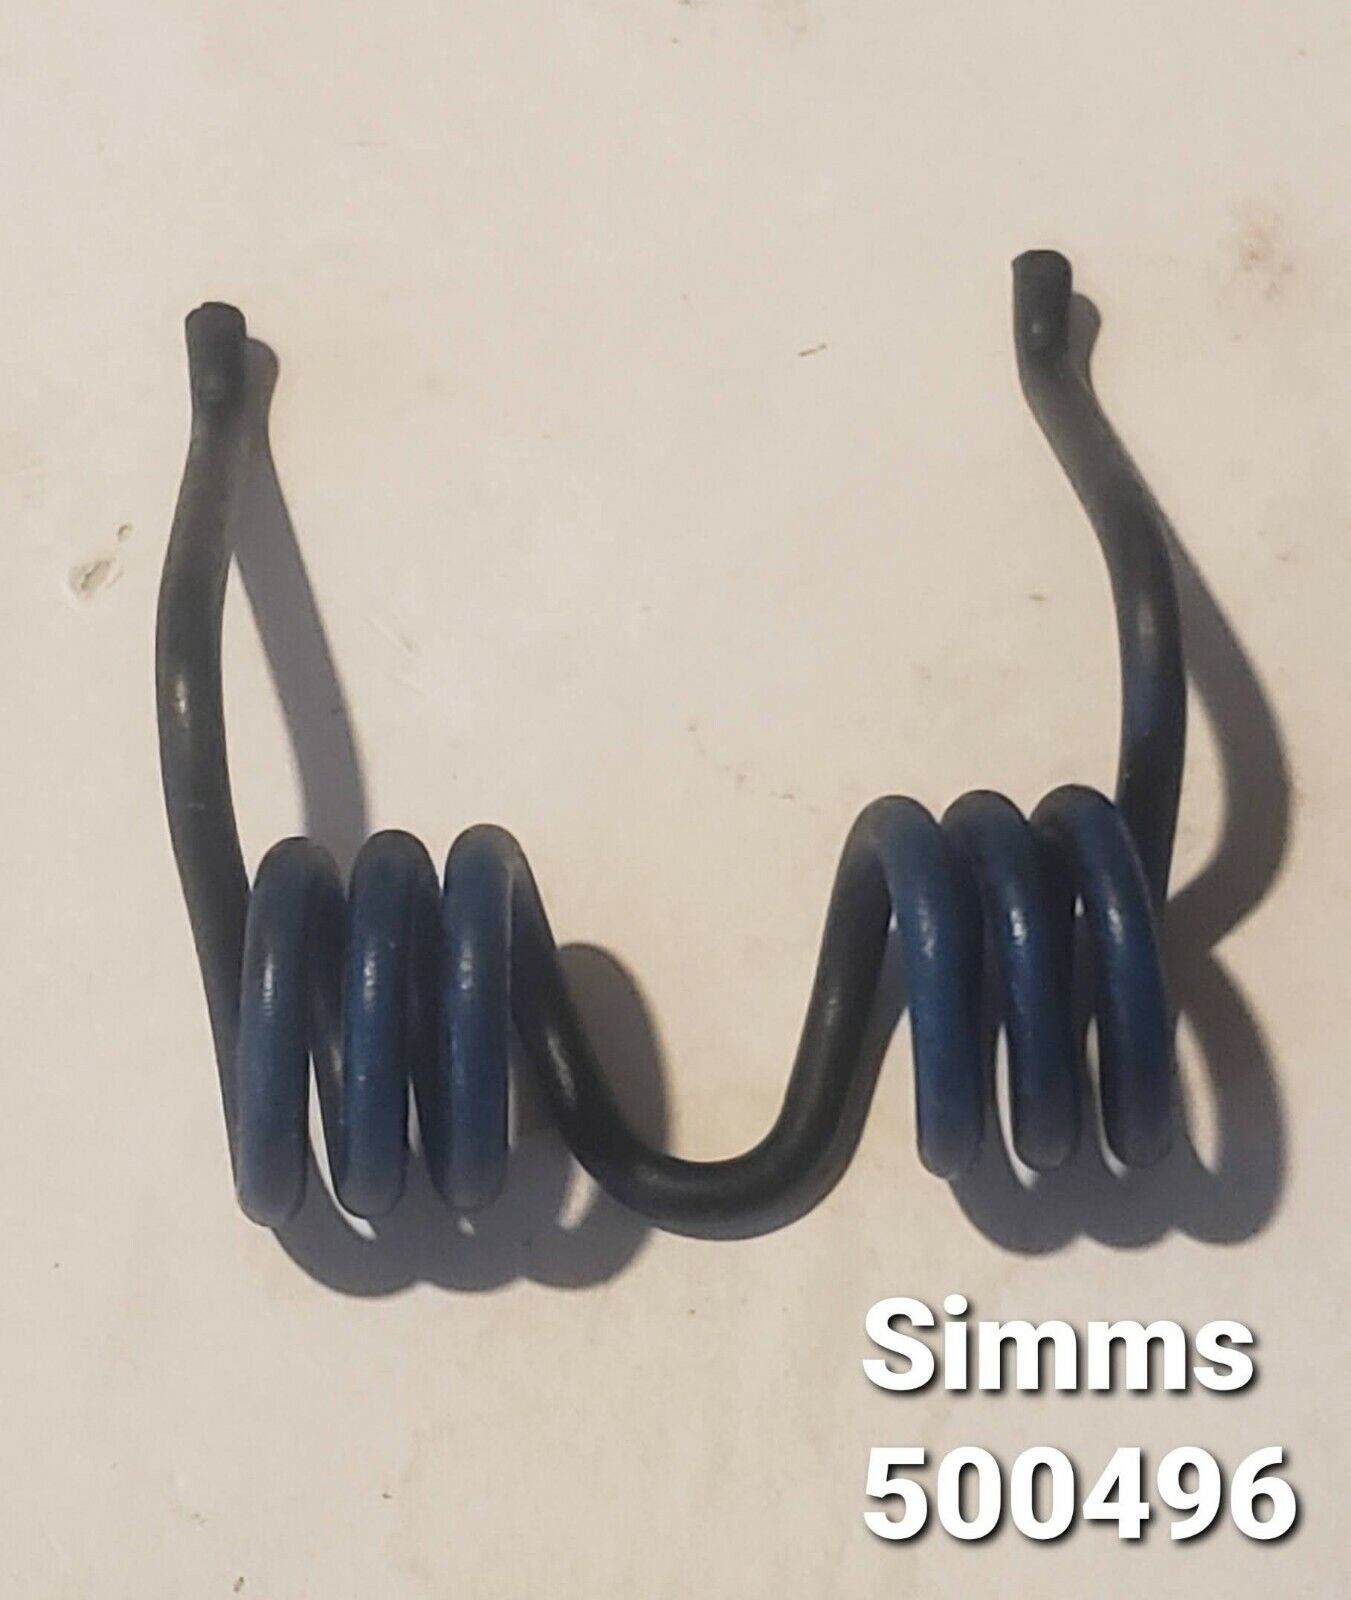 Lucas Cav Simms Governor Spring 500496 for Simms Injection Pump.